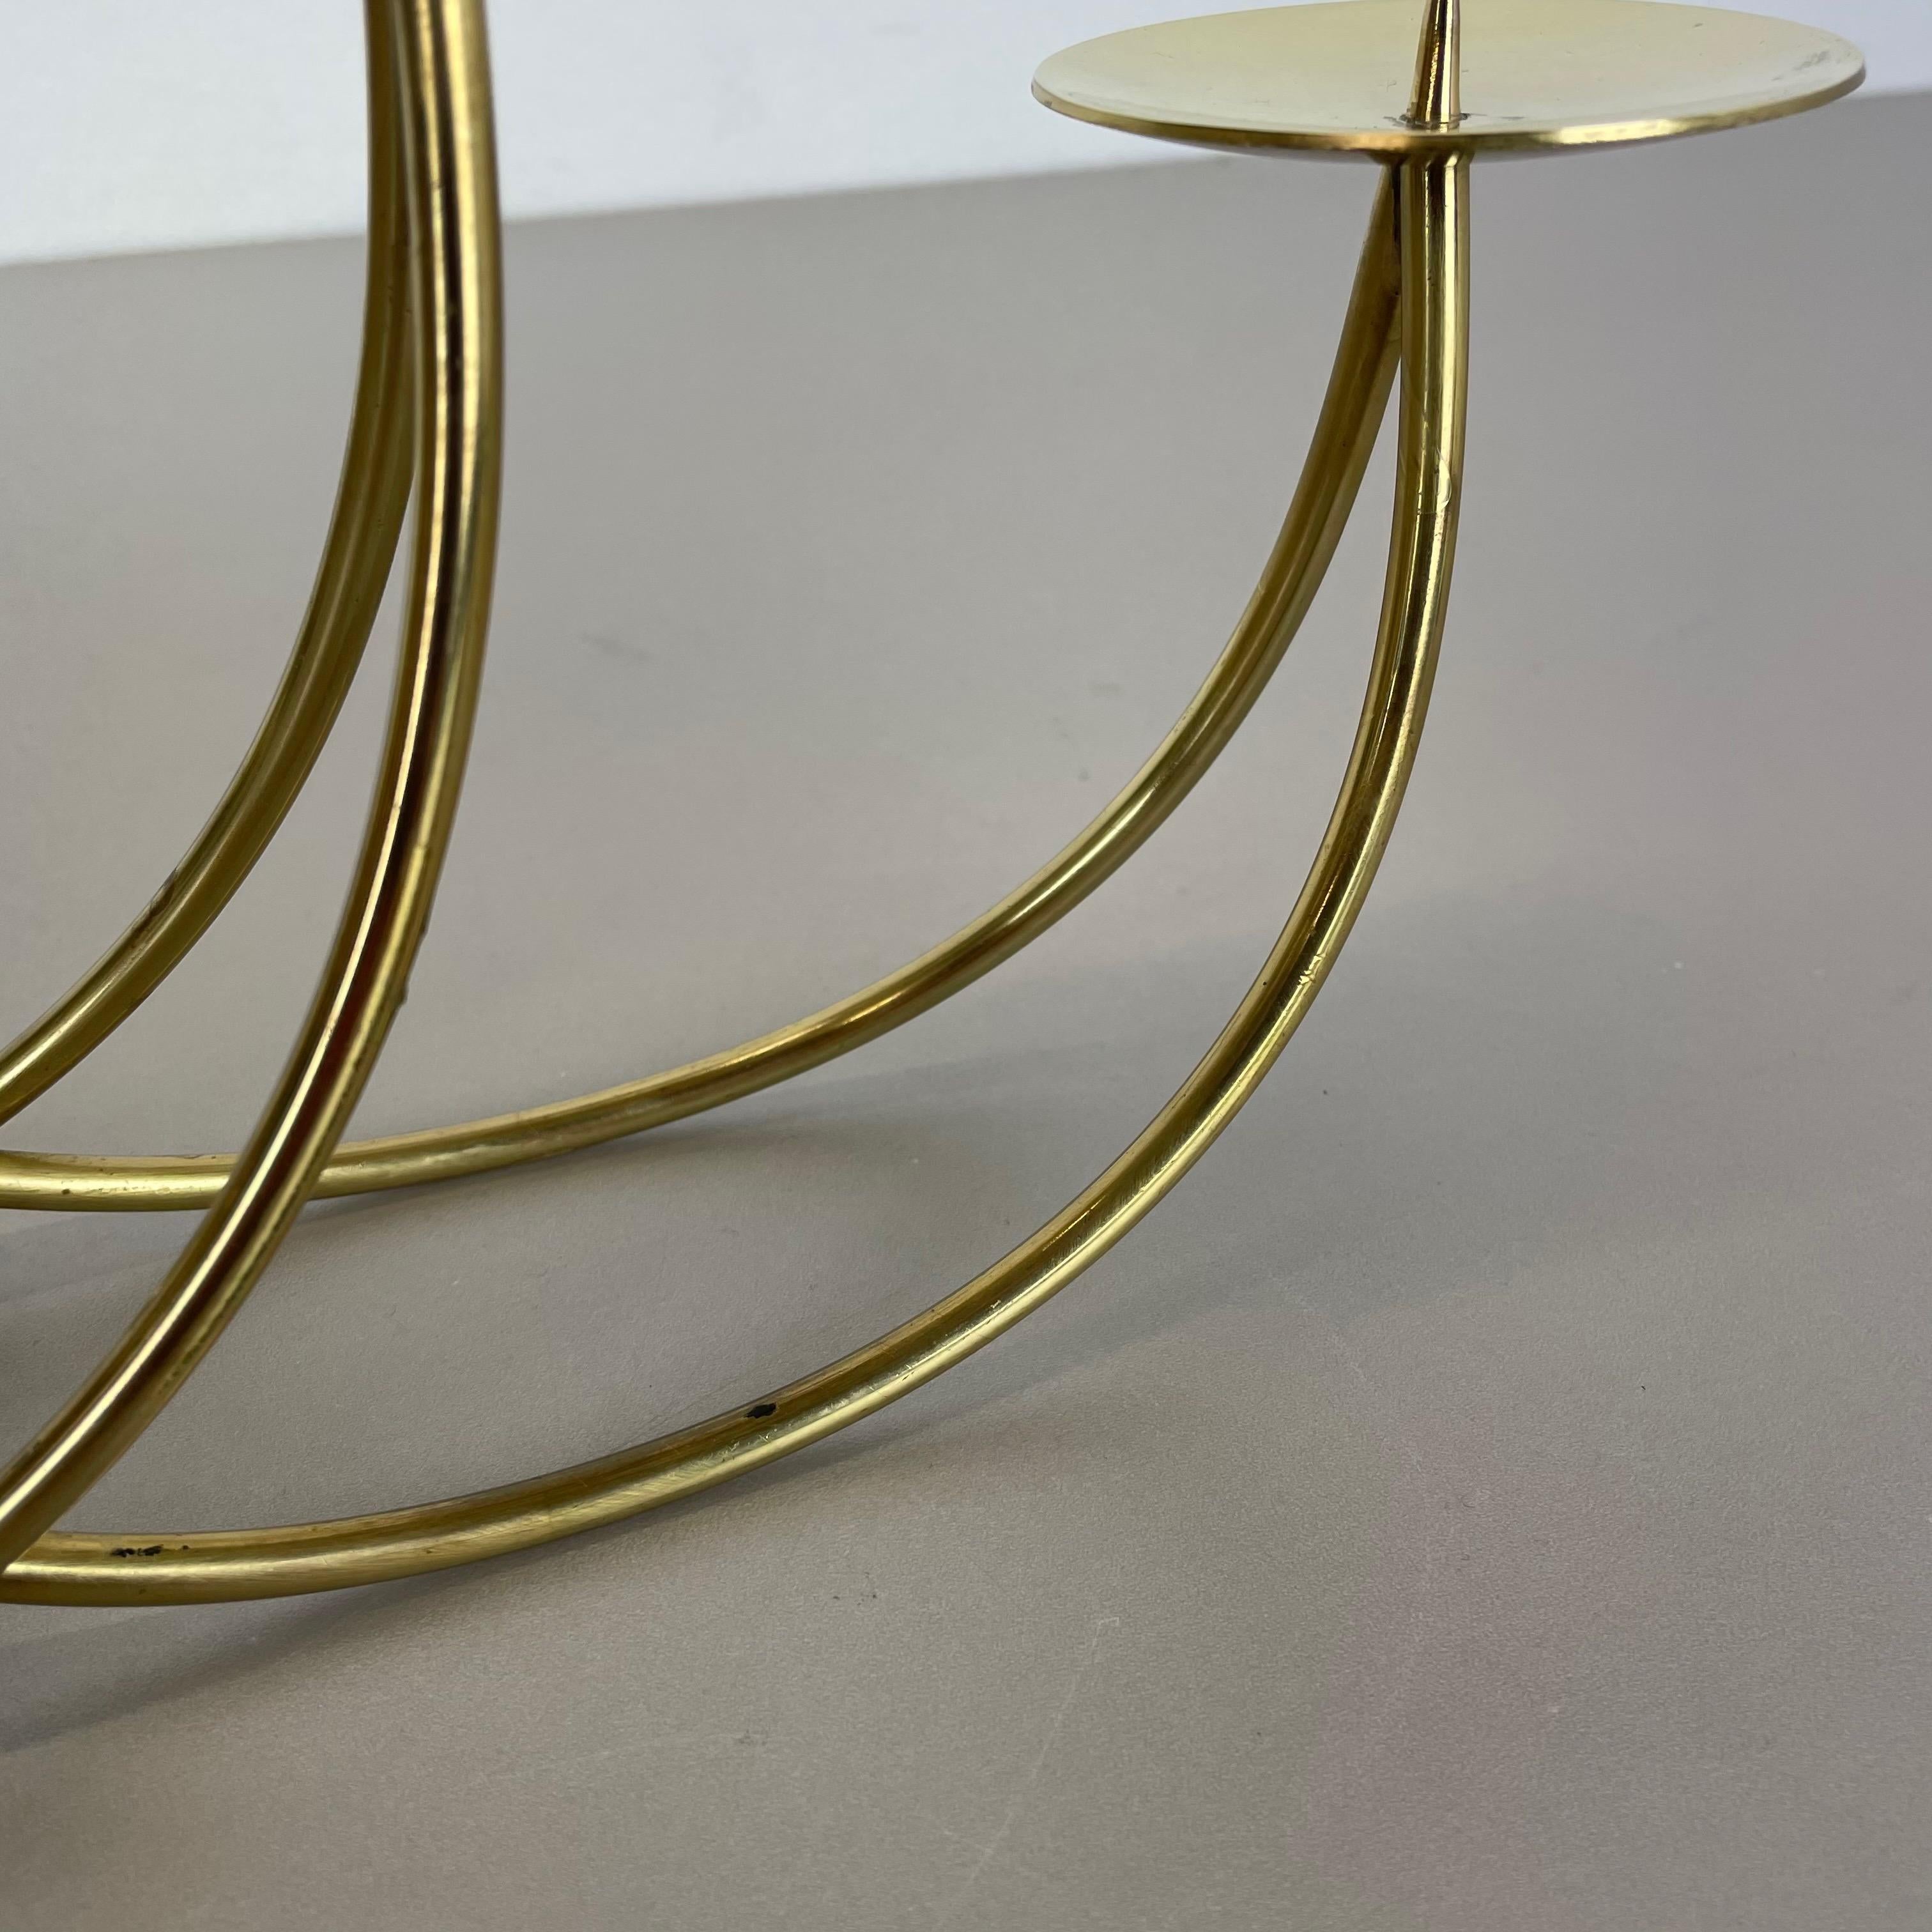 Sculptural Solid Brass Candleholder by Harald Buchrucker Bauhaus, Germany, 1950s For Sale 2